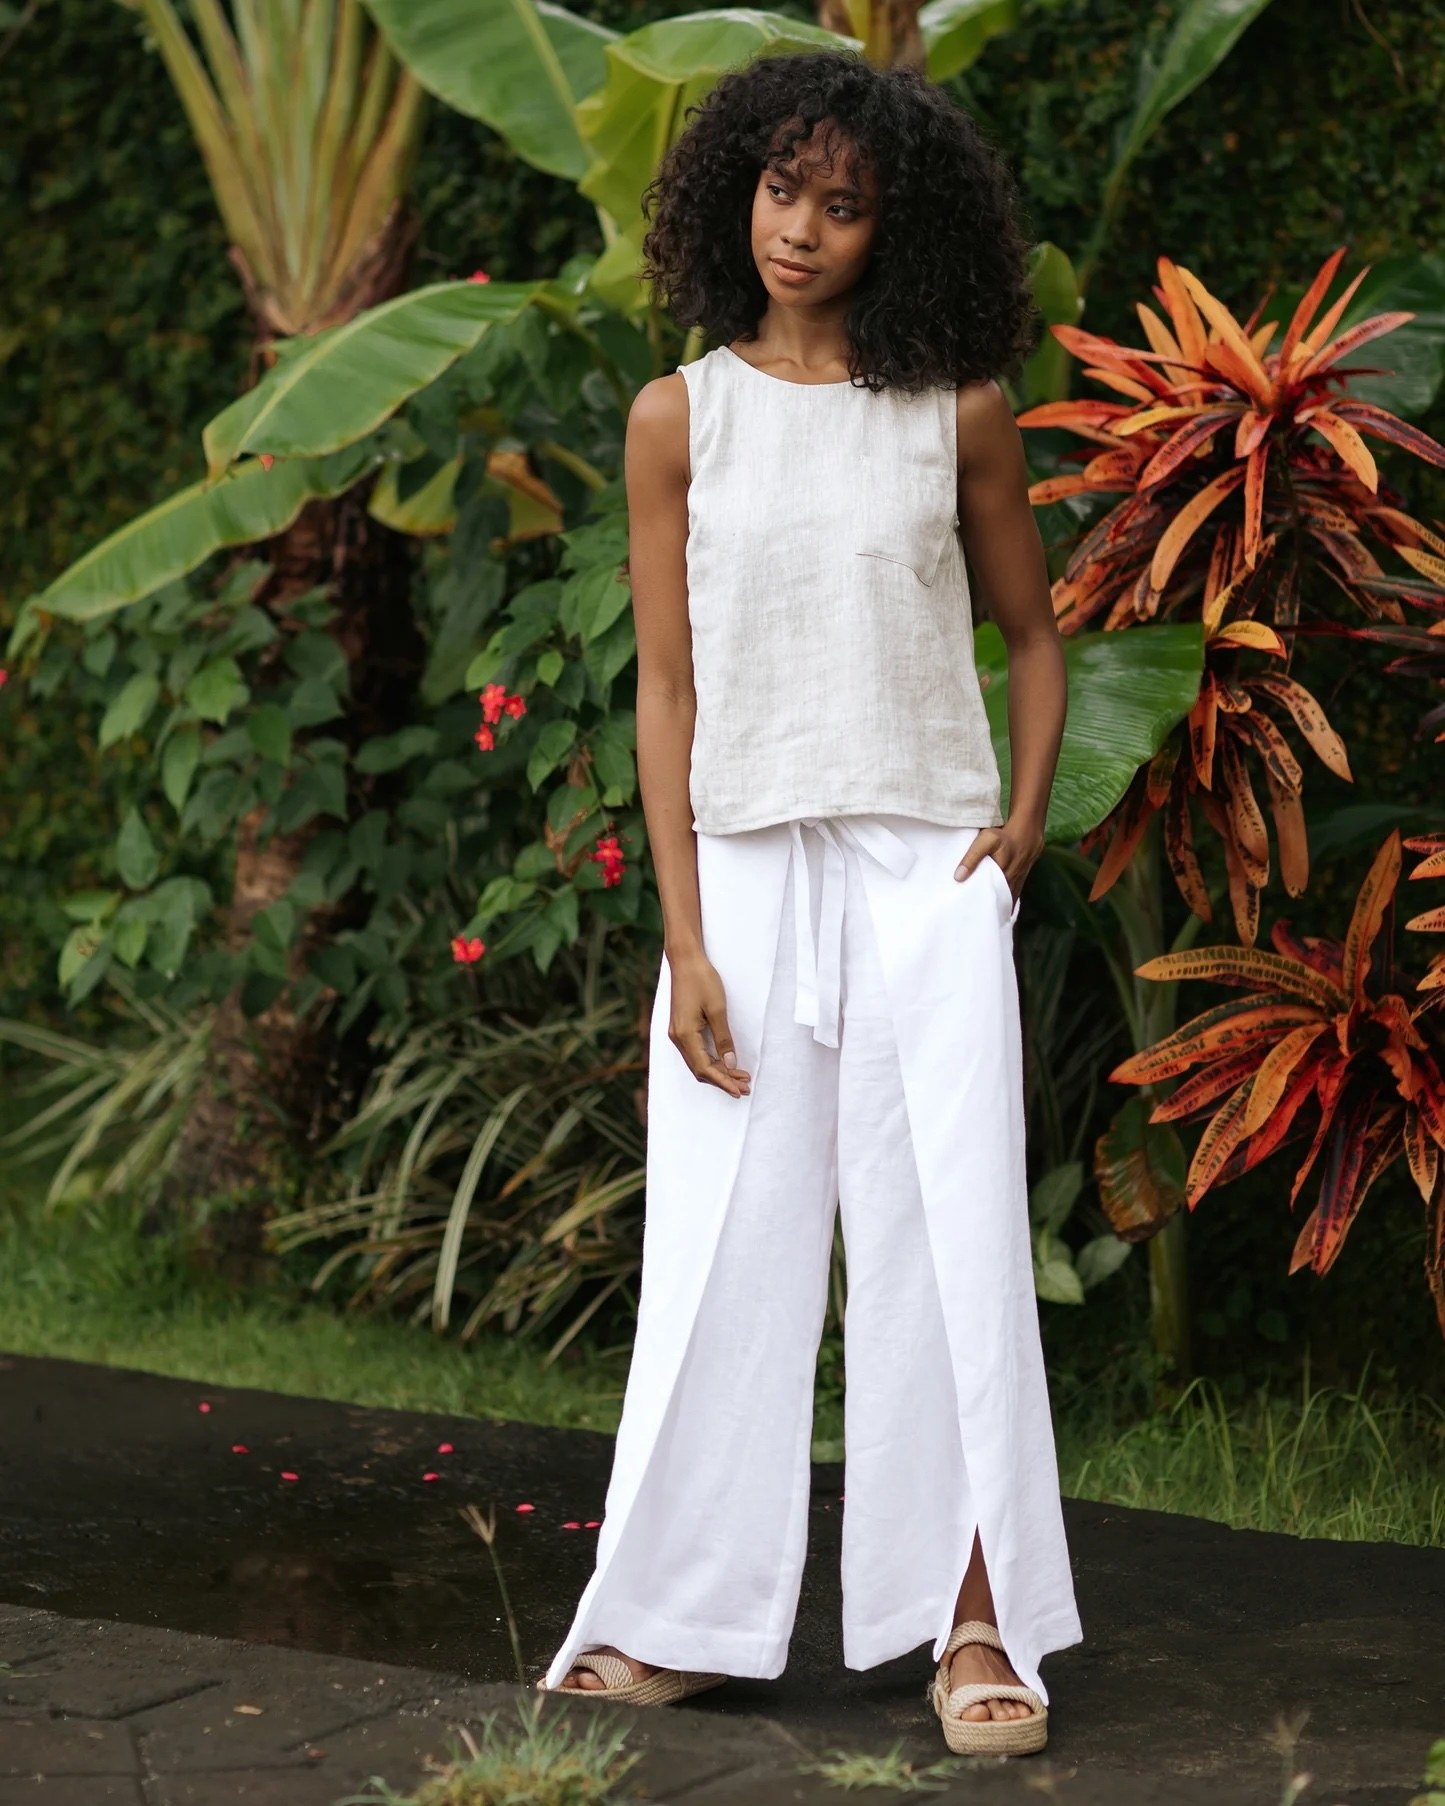 13 Pairs of Wide-Leg Linen Pants to Help You Stay Cool and